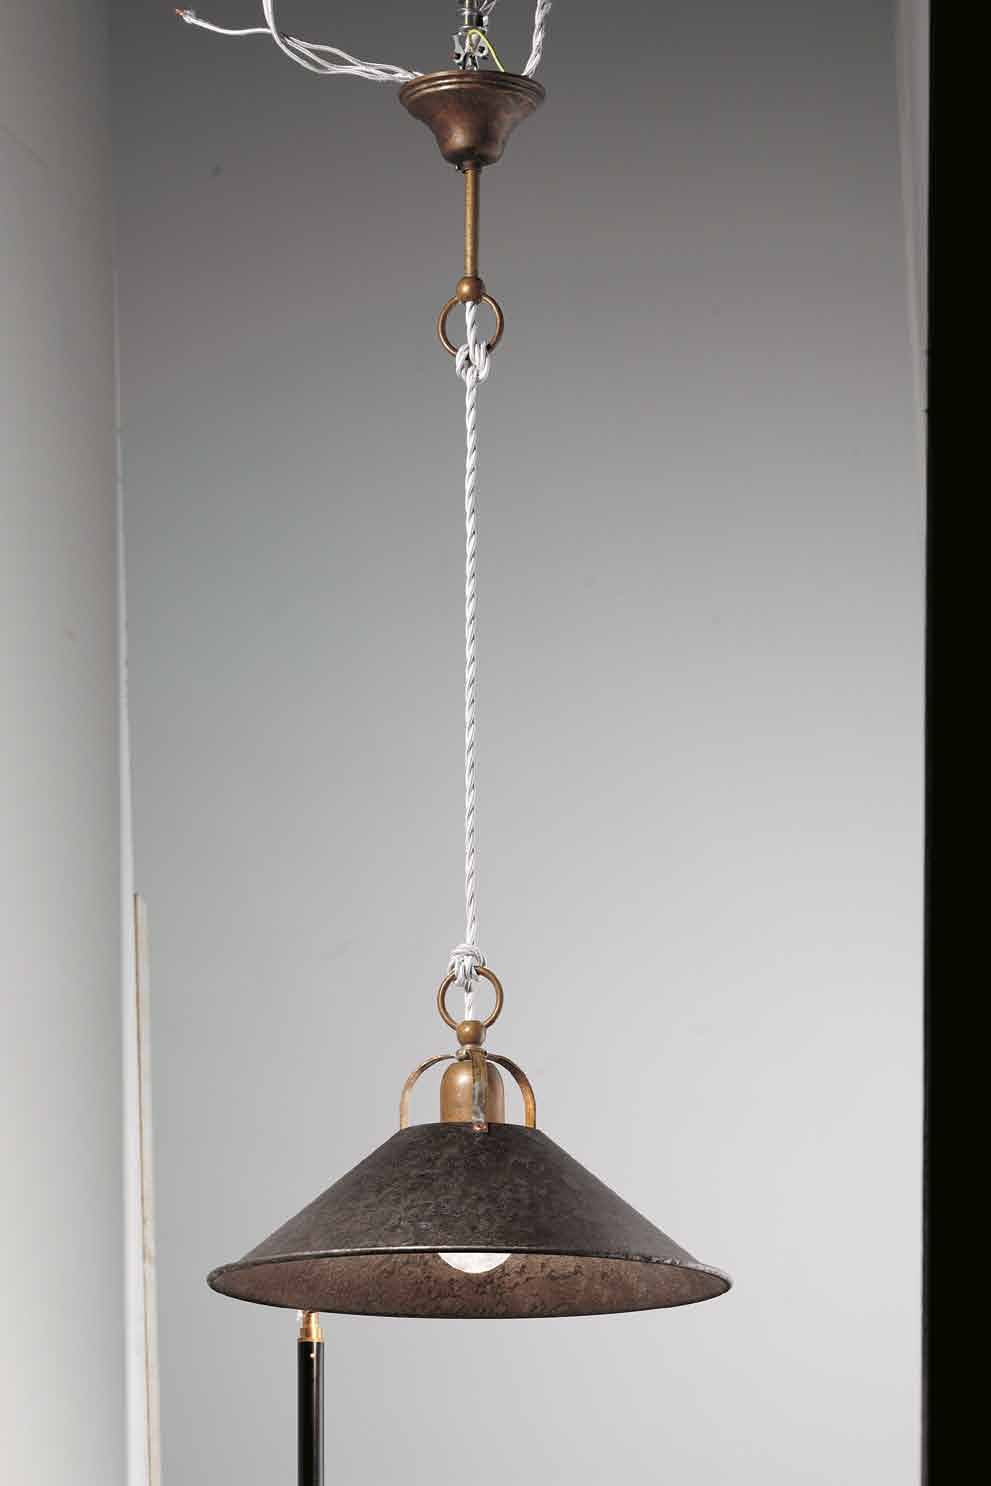 Collection for interior with conical forms in a solution of antiqued brass.